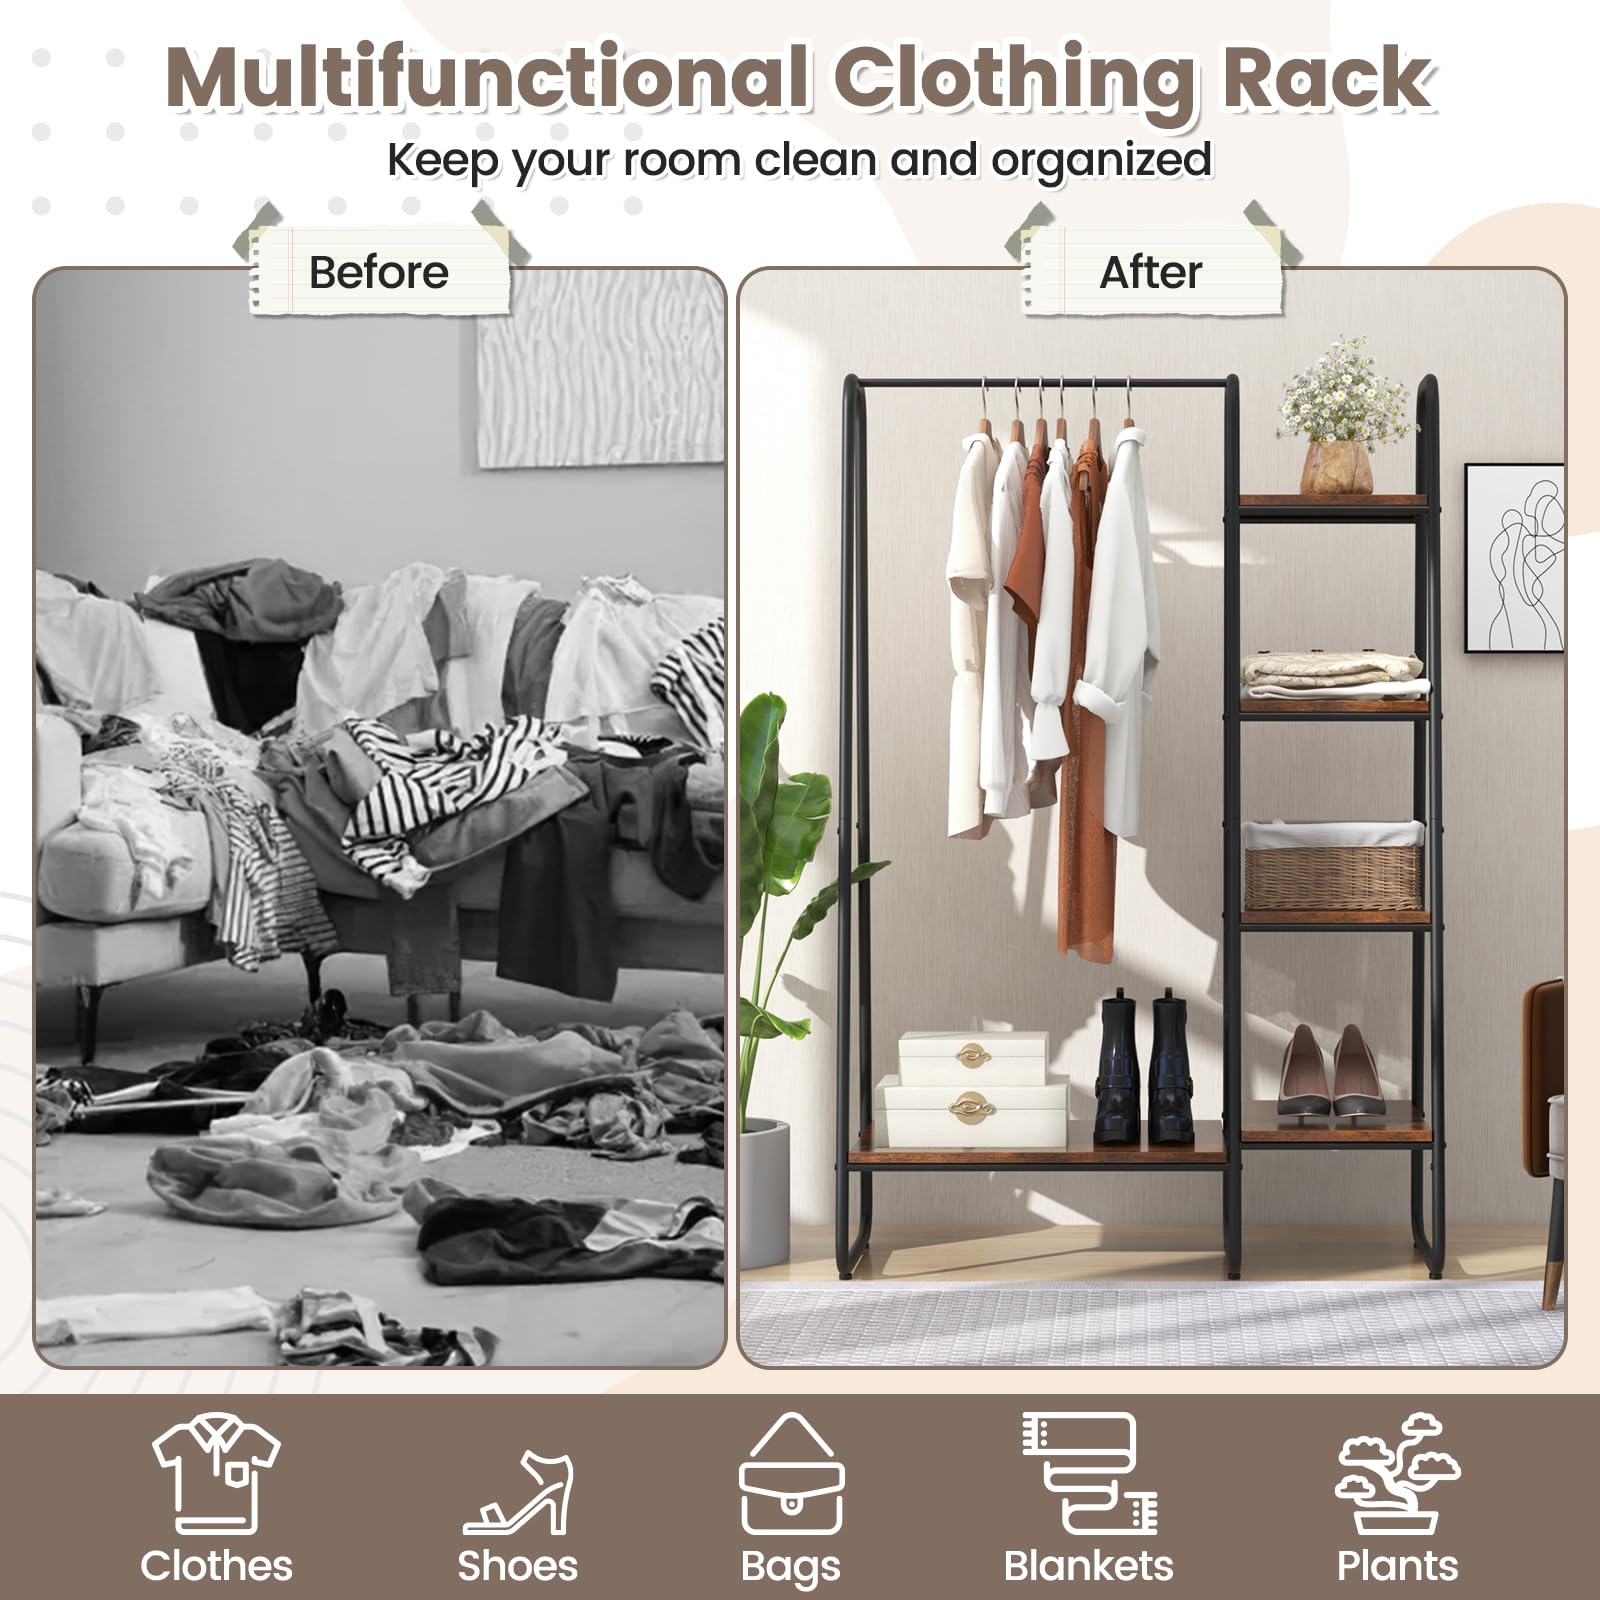 Giantex Clothes Rack with Shelves, Industrial Garment Rack with 5-Tier Shelves